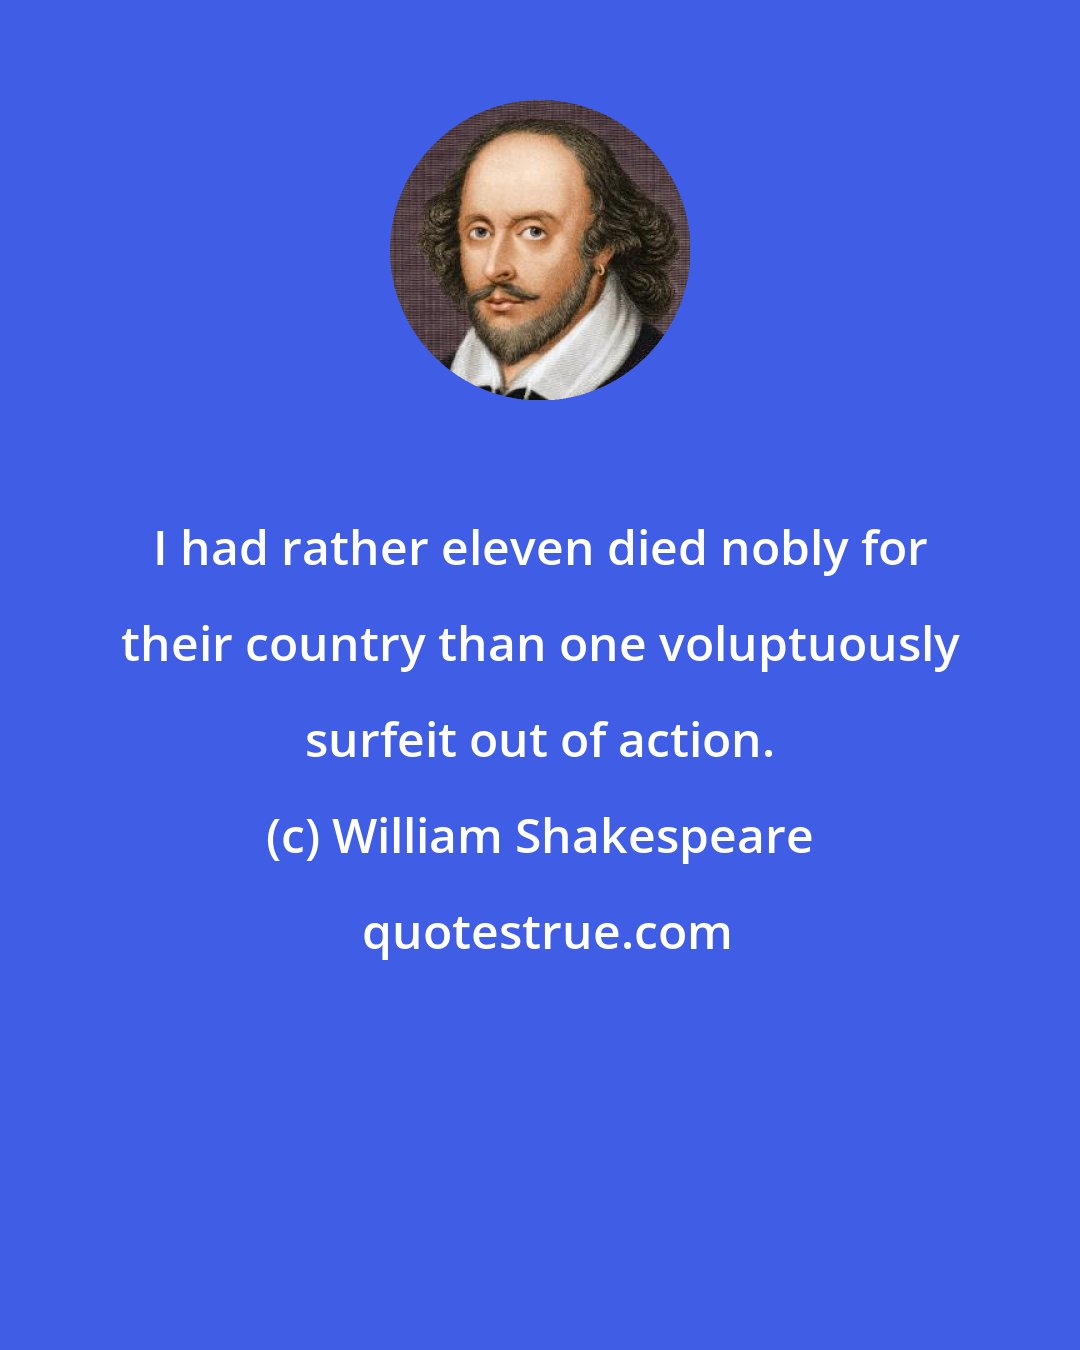 William Shakespeare: I had rather eleven died nobly for their country than one voluptuously surfeit out of action.